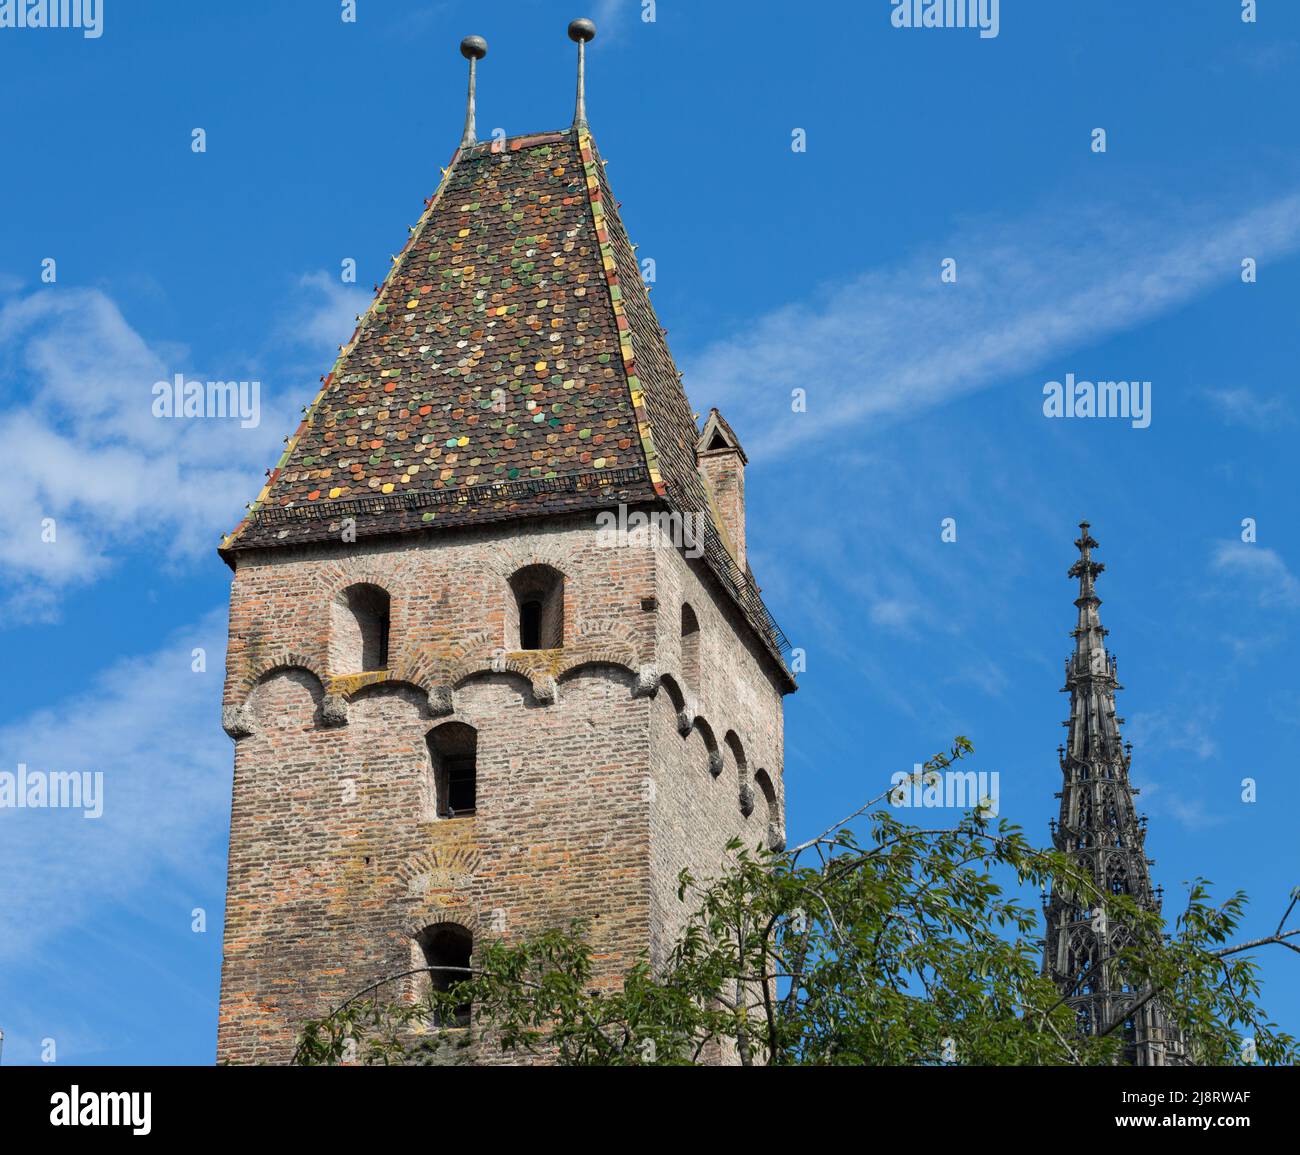 Ulm, Germany - Aug 8, 2021: View on the top of the Metzgerturm (historical tower). Part of the historical city center of Ulm. Stock Photo